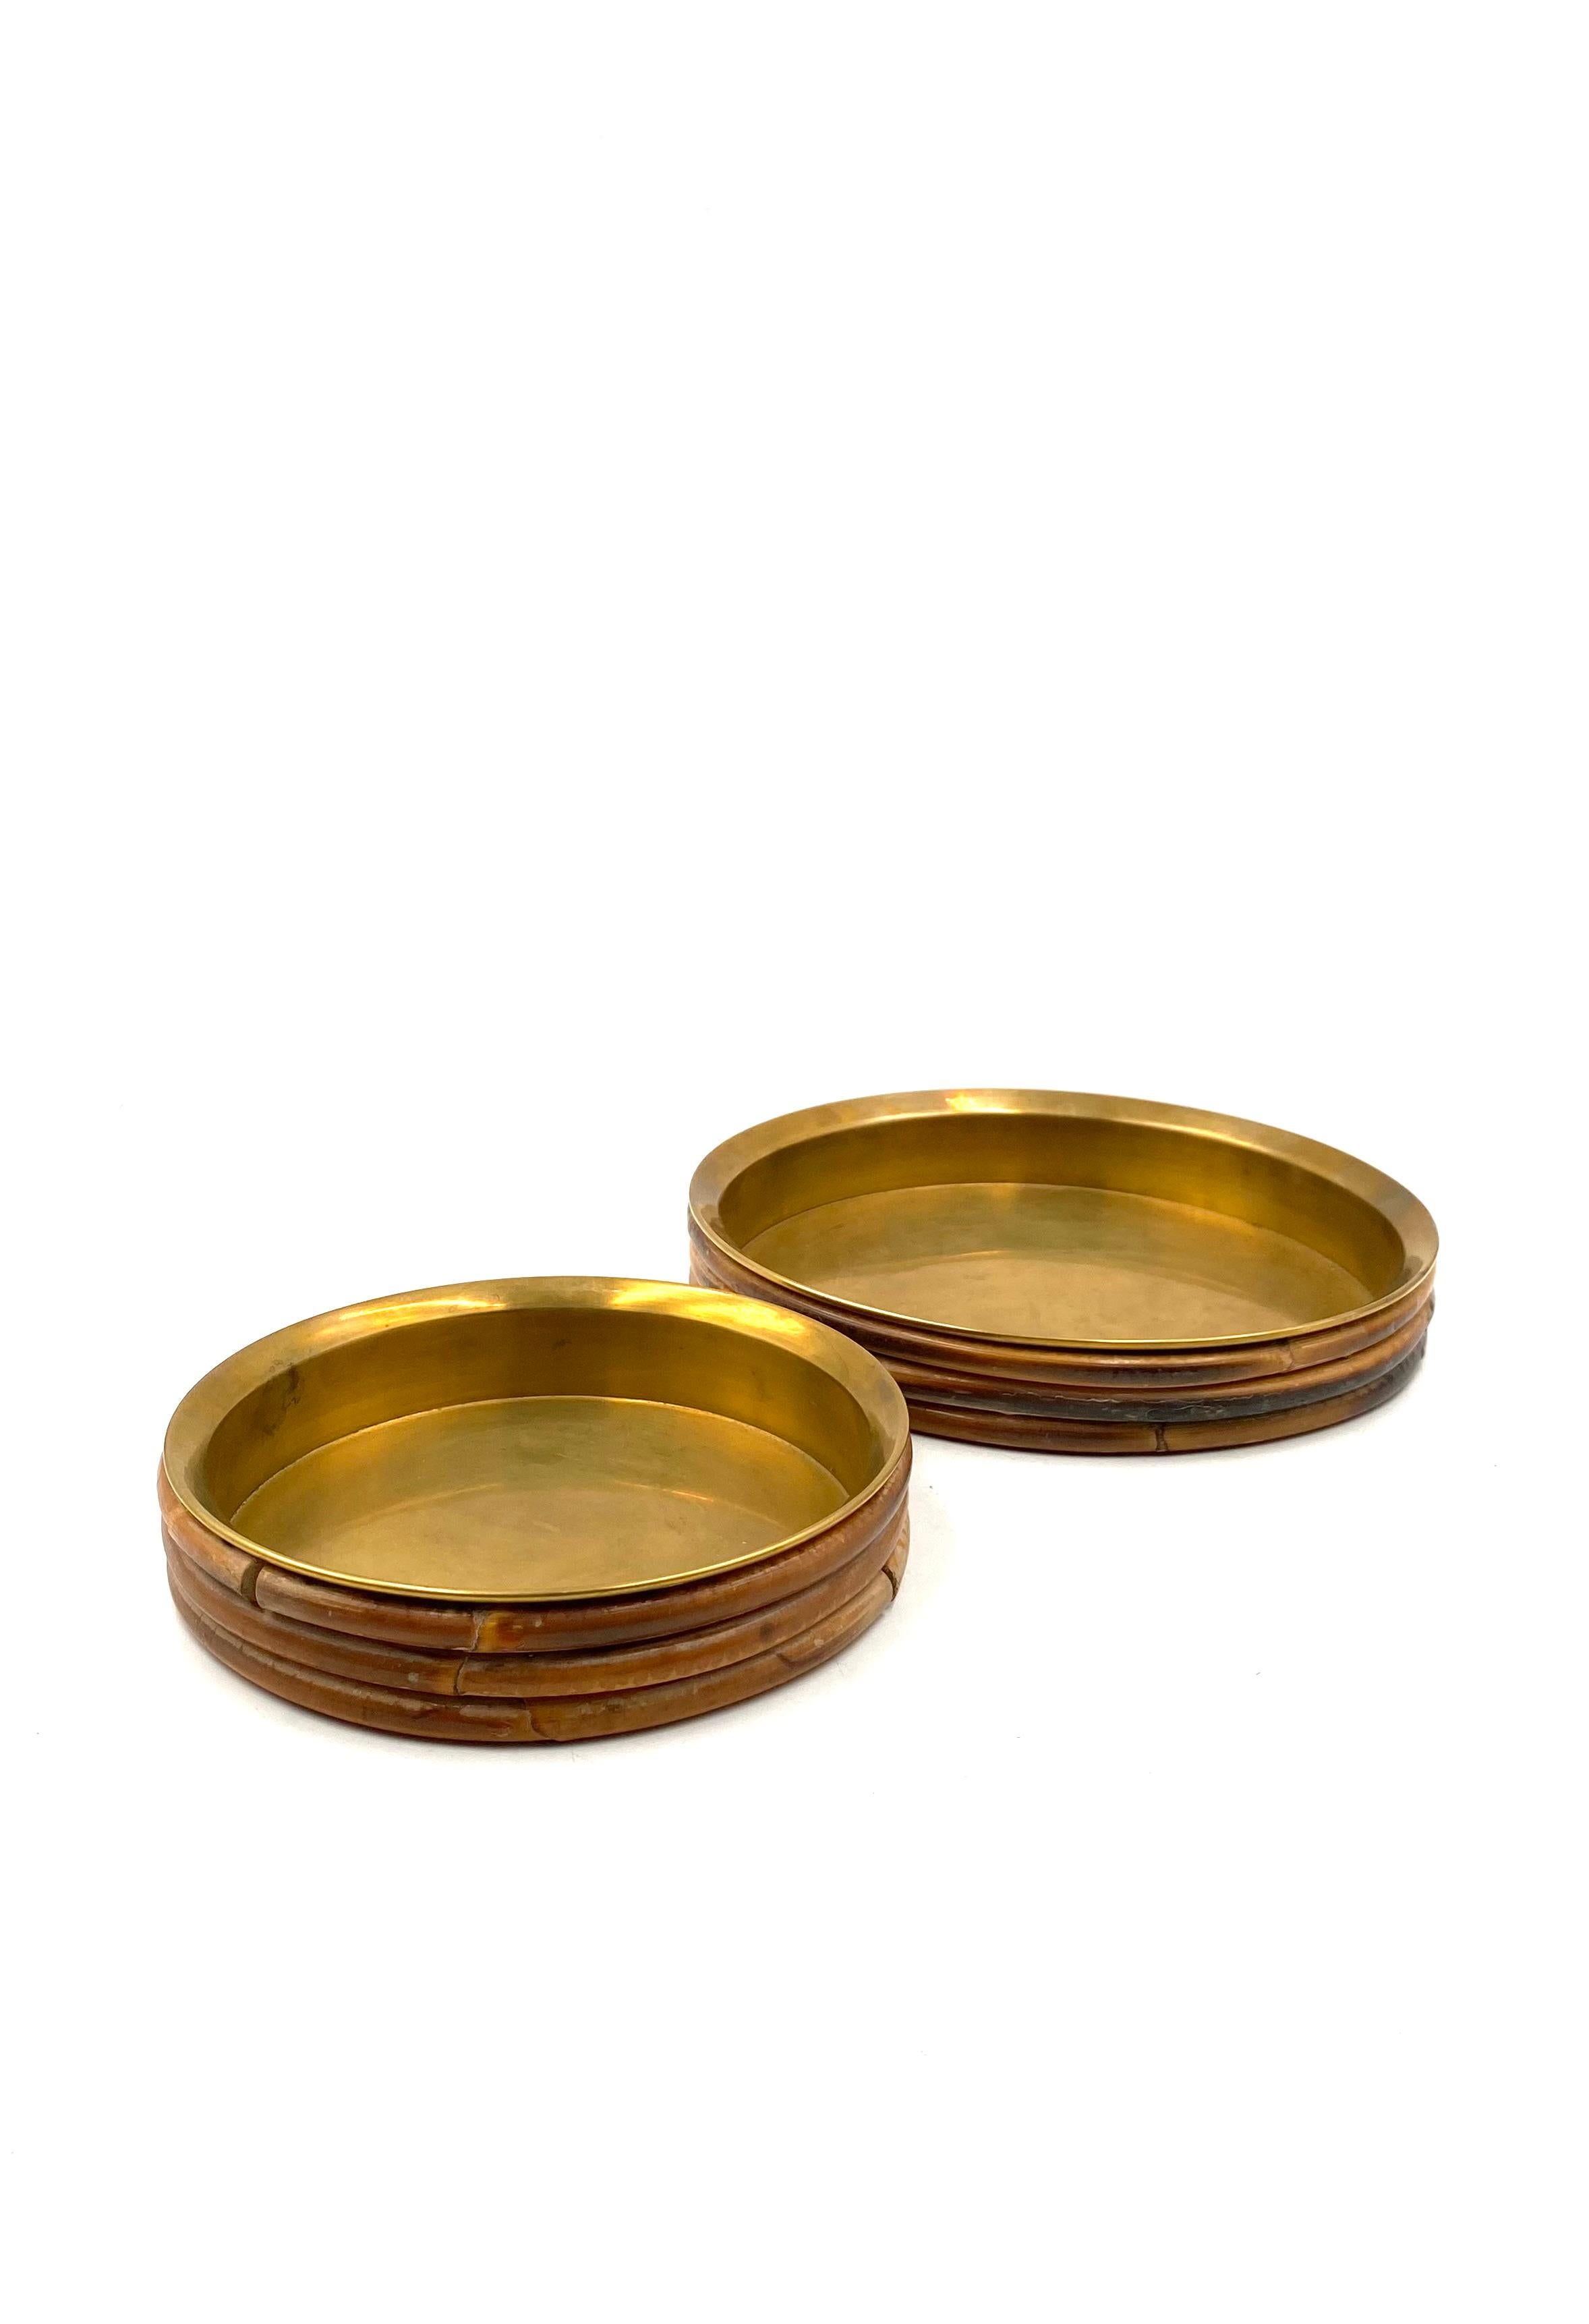 Hollywood regency brass and wicker set of 2 vide poche, Italy ca. 1970 For Sale 7